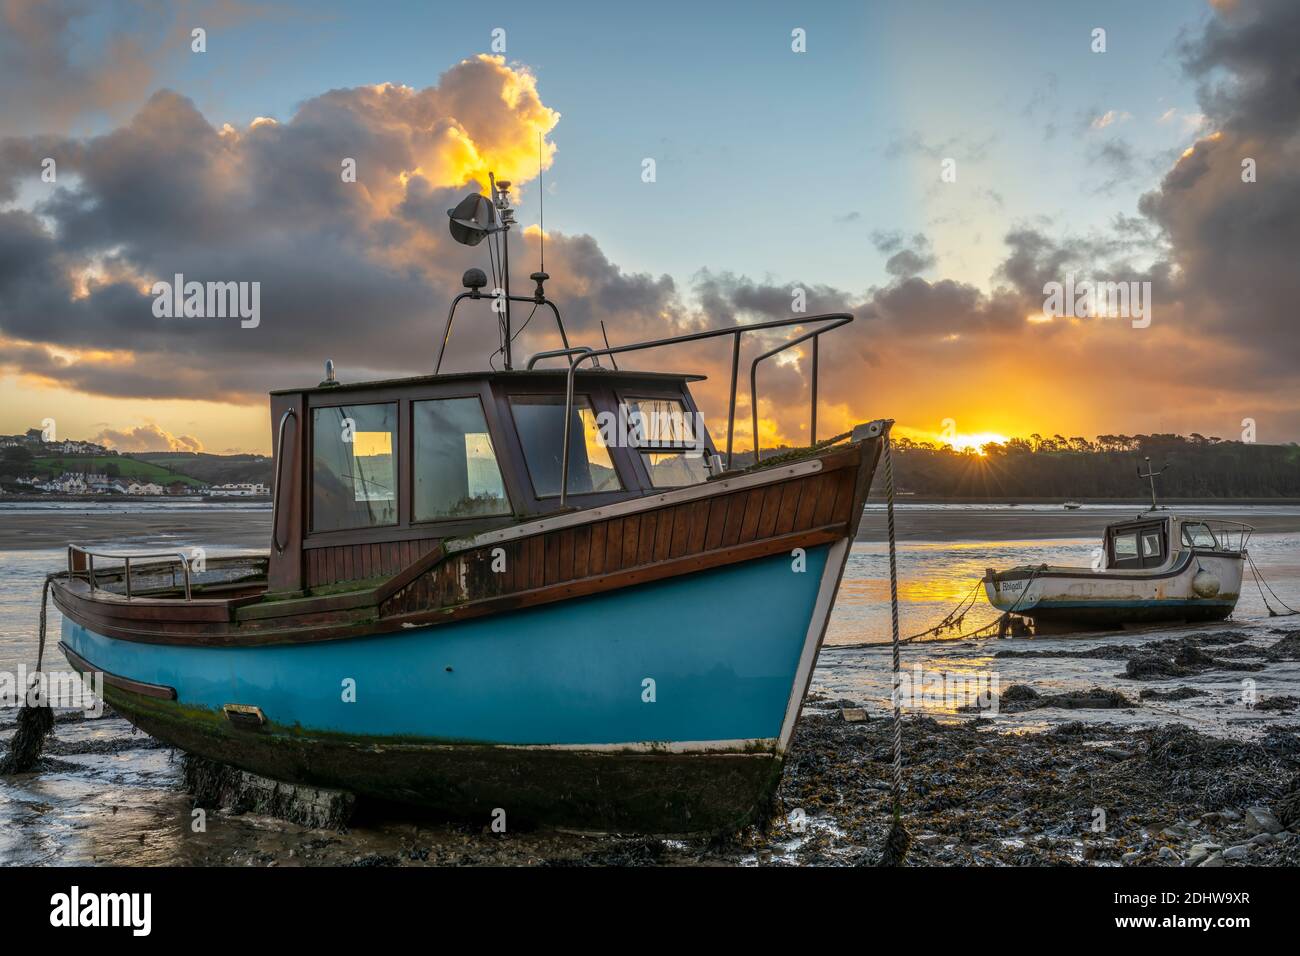 Appledore, North Devon, England. Saturday 12th December 2020. UK Weather. A cold and breezy start to the day in North Devon as the sun rises over the River Torridge, lighting up the fishing boats moored along the estuary, at the coastal village of Appledore. Credit: Terry Mathews/Alamy Live News Stock Photo